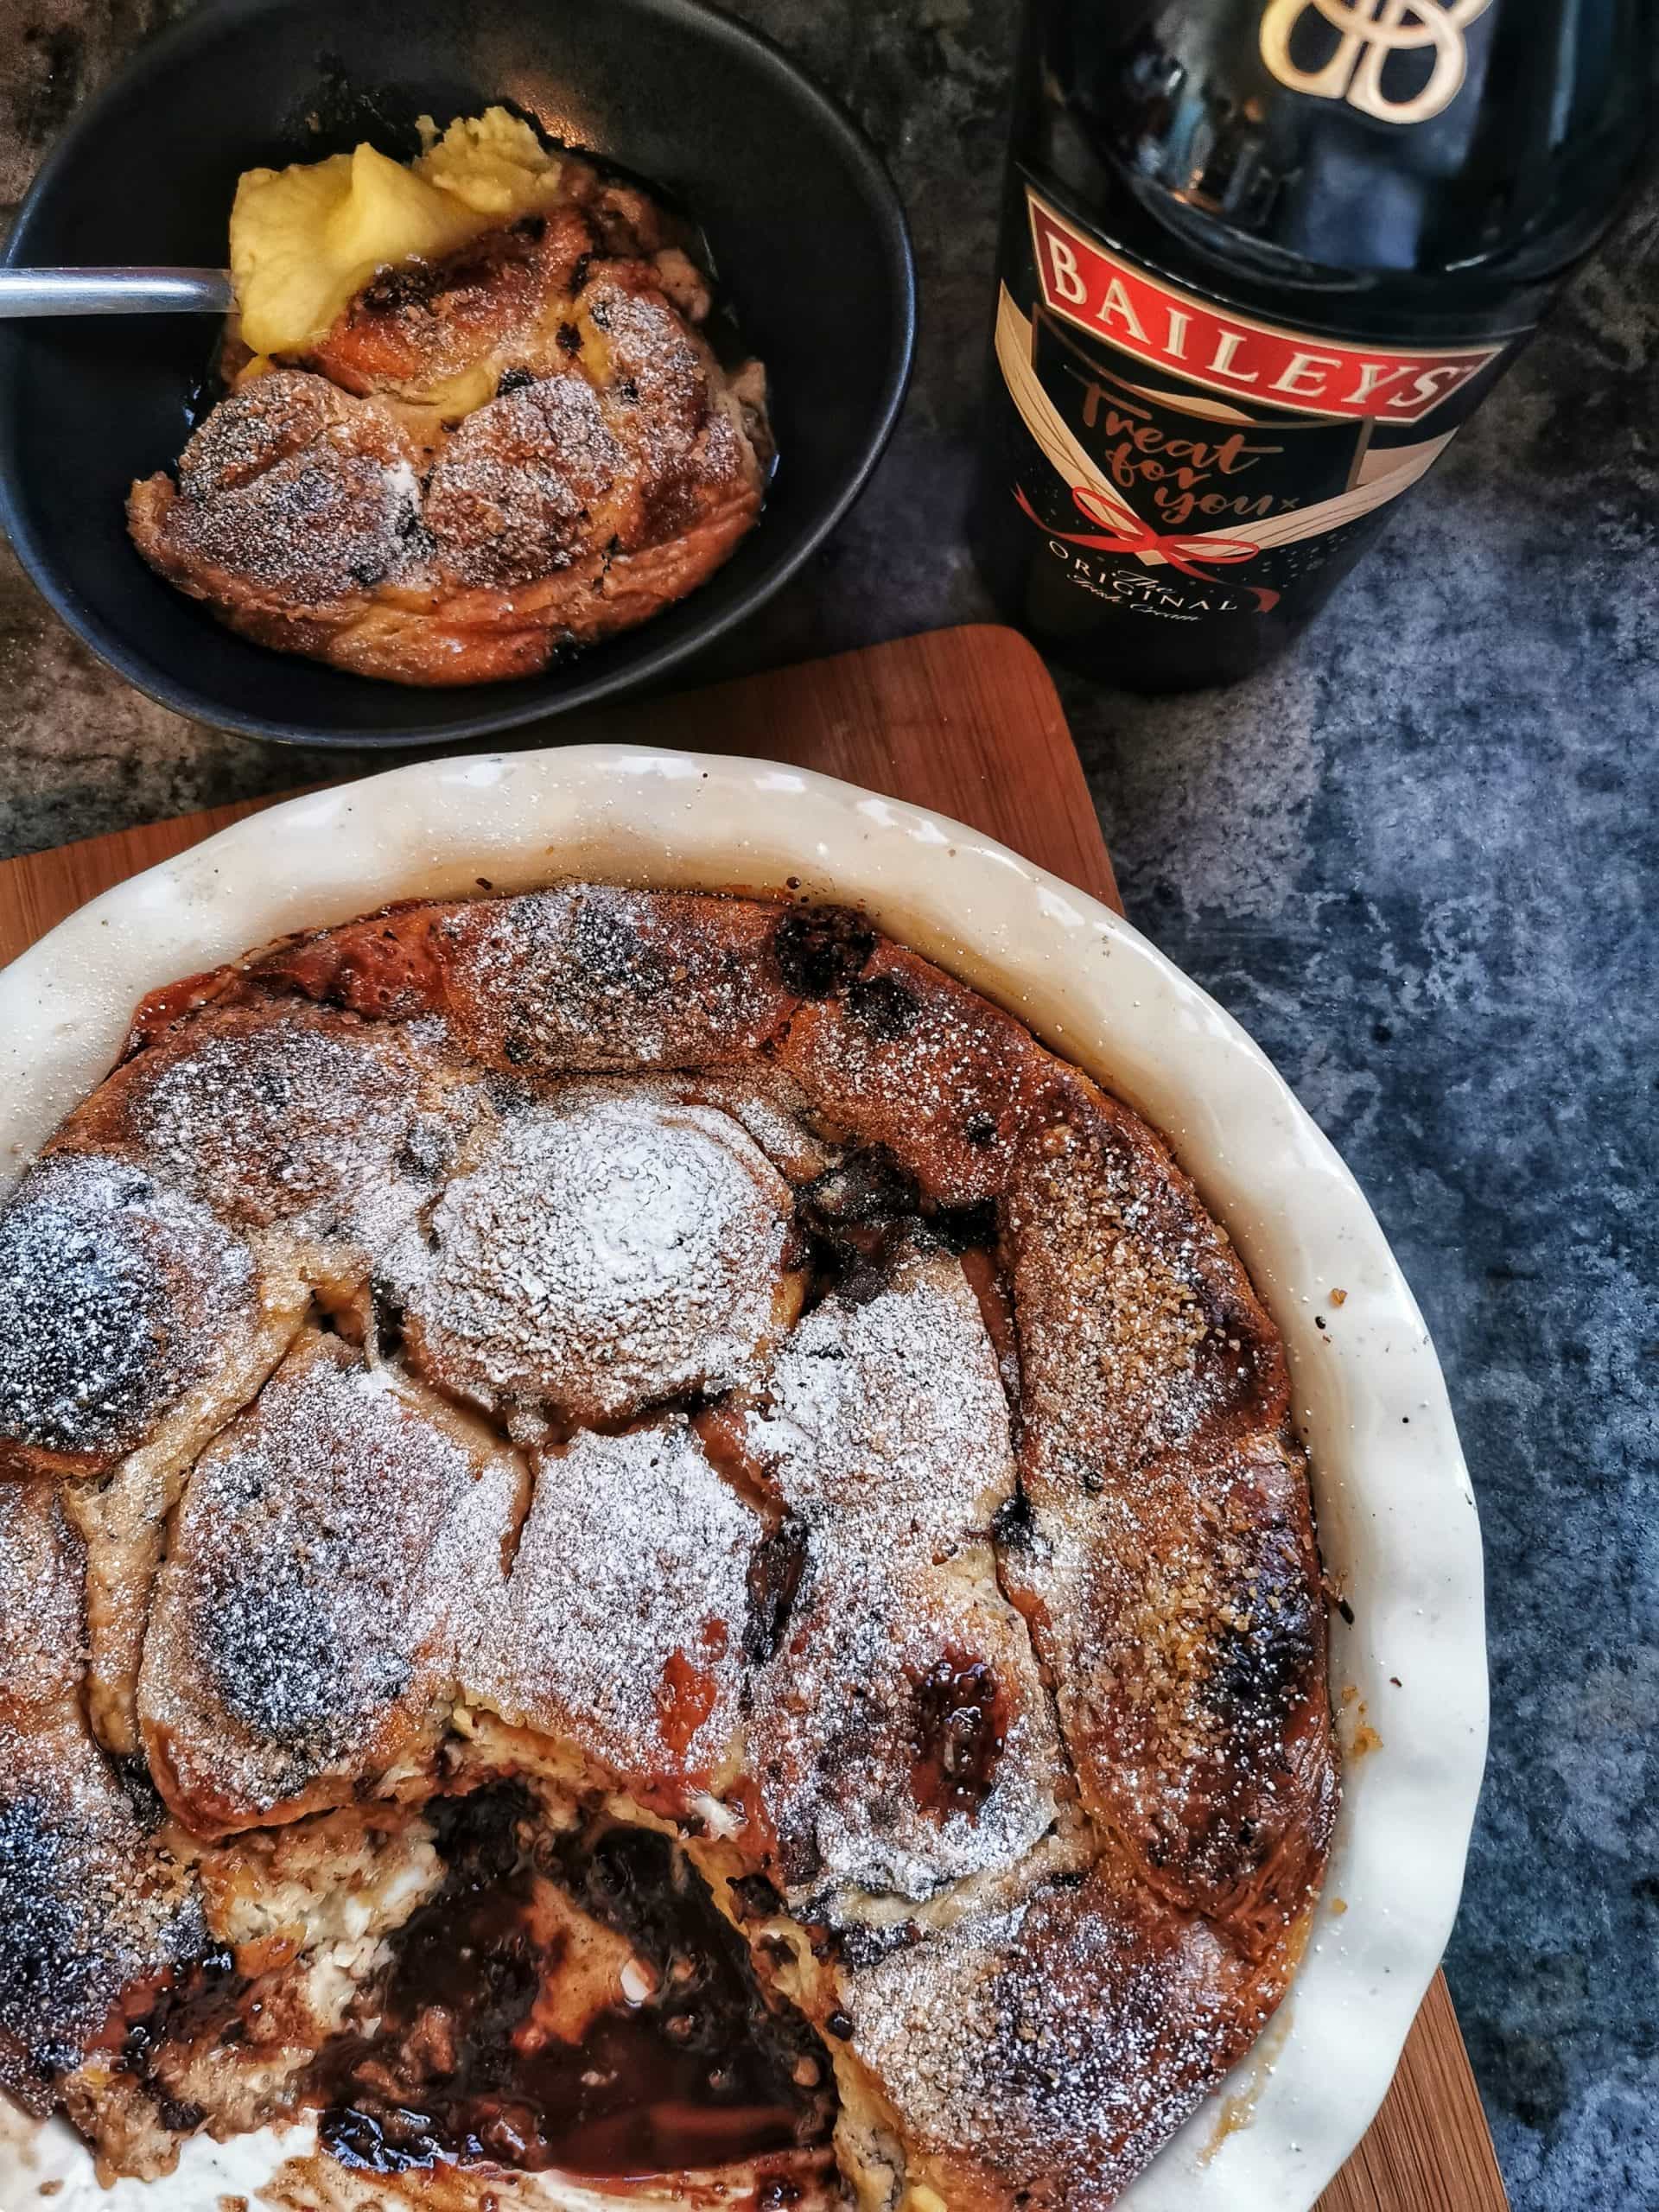 A chocolate baileys brioche pudding in a round dish. A bottle of baileys and a small bowl containing the pudding with cream can also be seen 